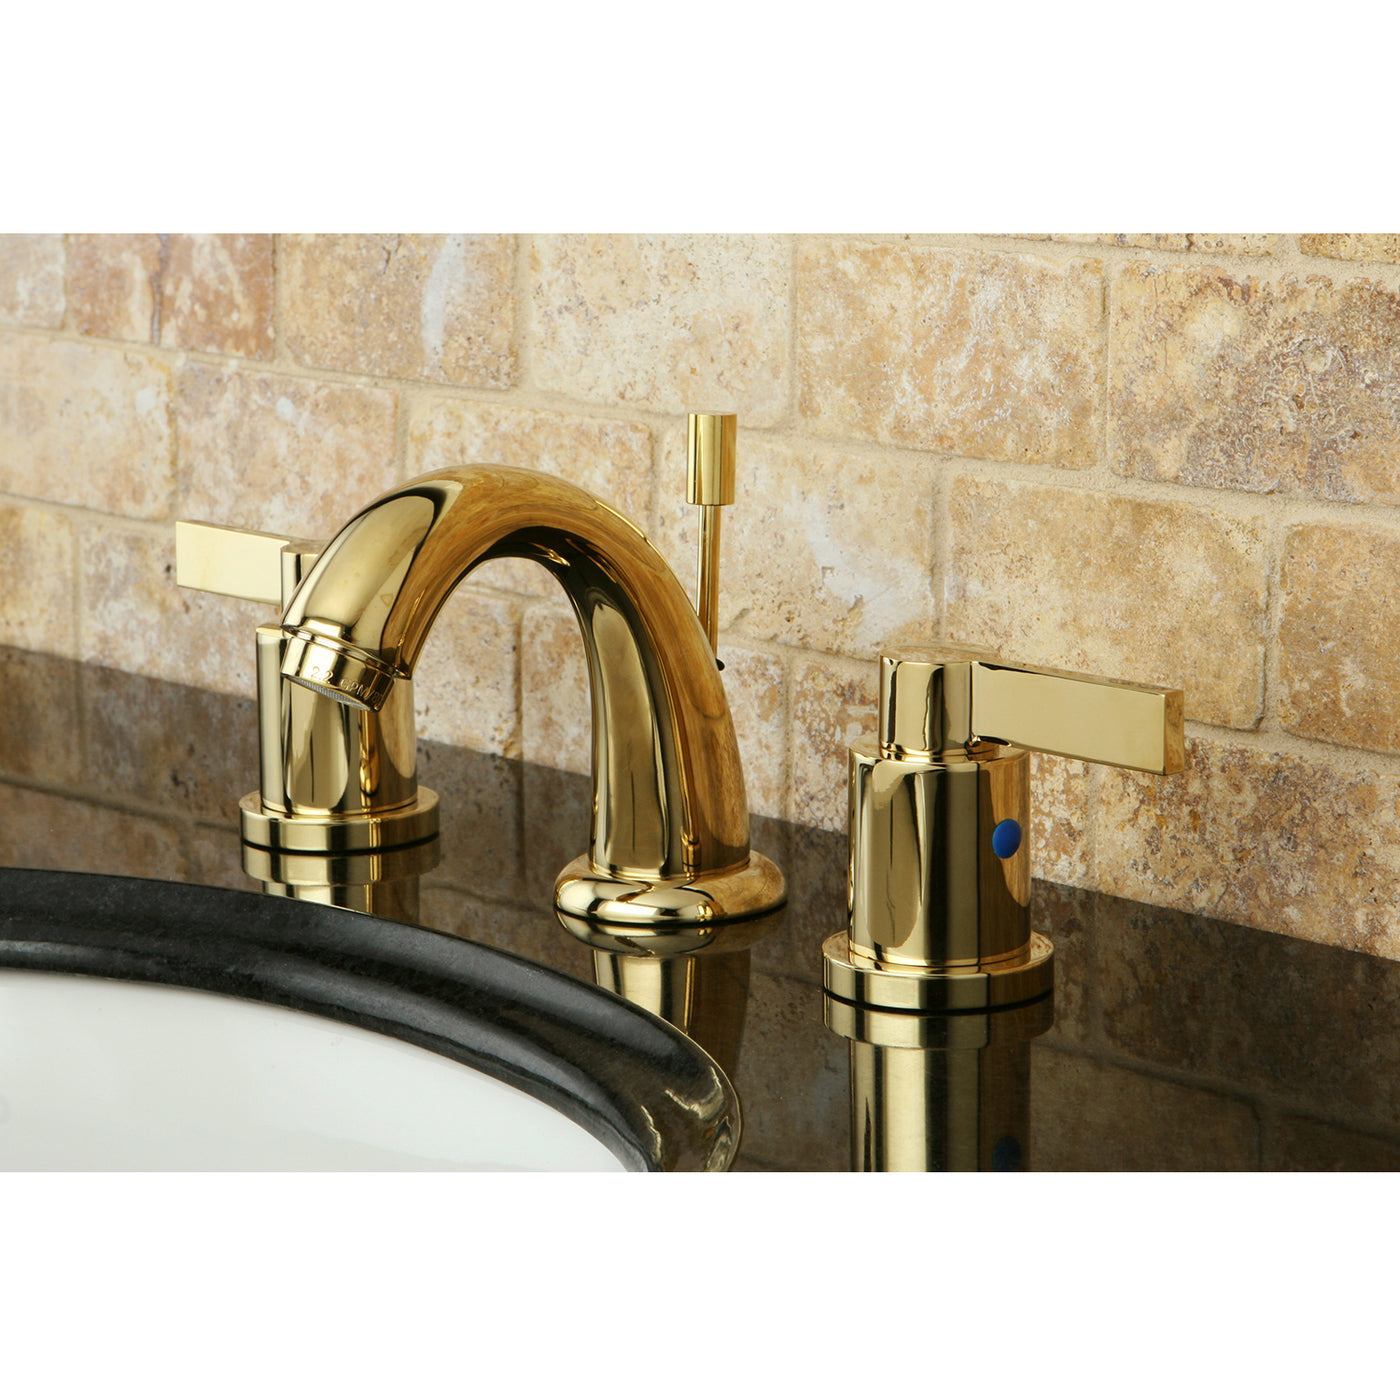 Elements of Design EB8912NDL Widespread Bathroom Faucet, Polished Brass